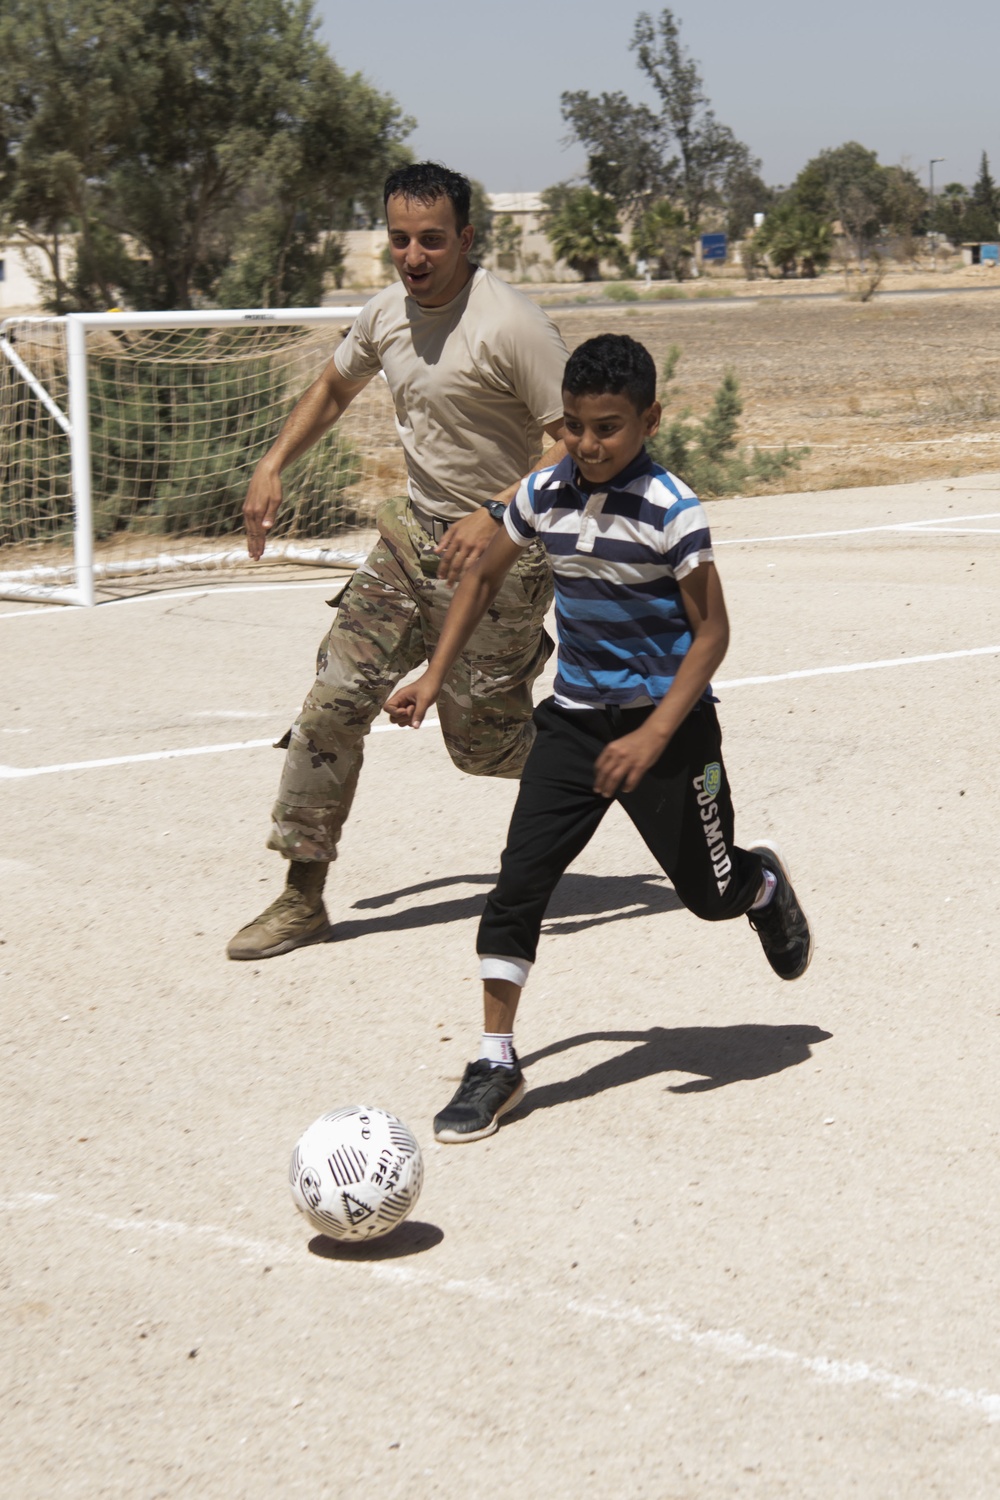 Airman collects donations, renovates soccer field for local kids